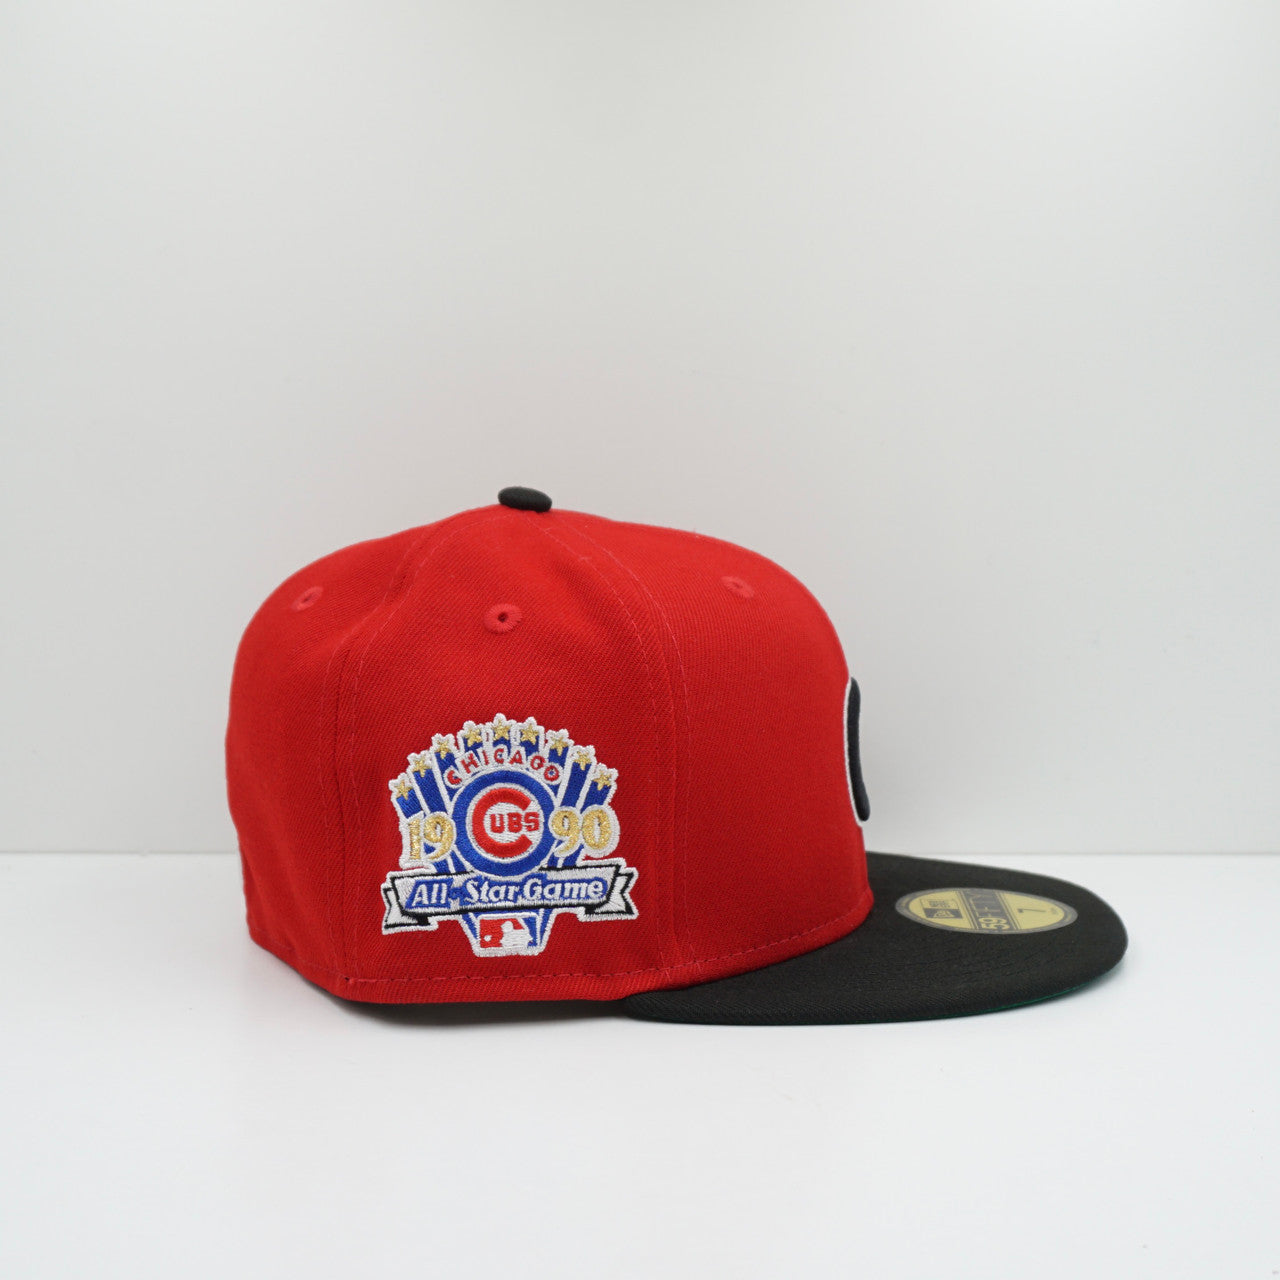 New Era Chicago Cubs Just Don Fitted Cap